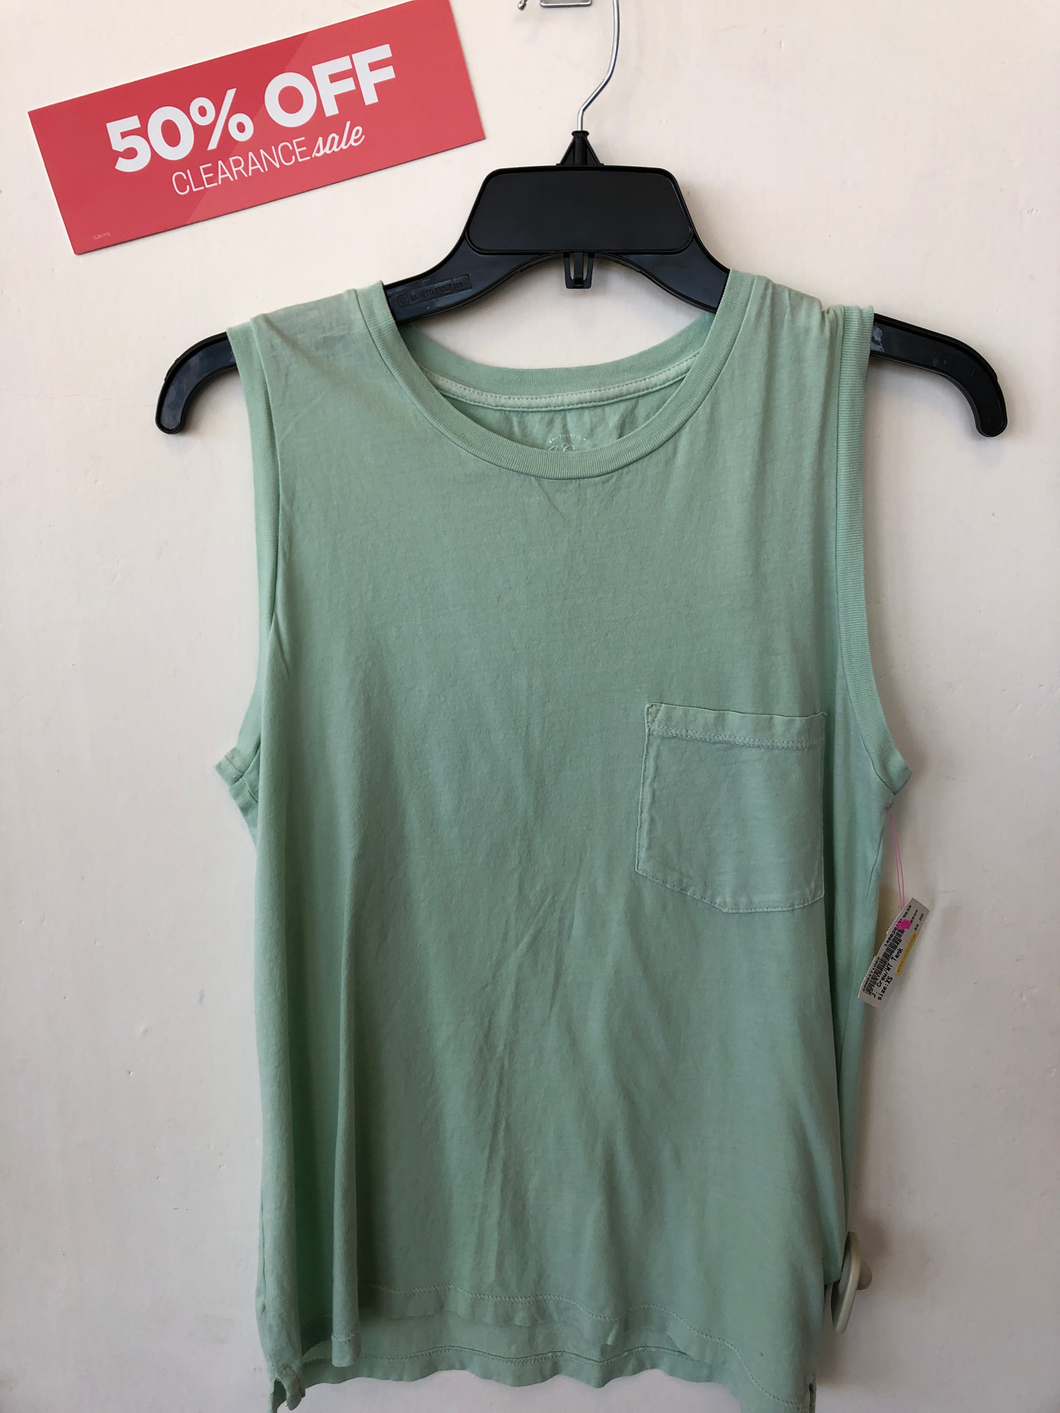 J. Crew Tank Top Size Extra Small